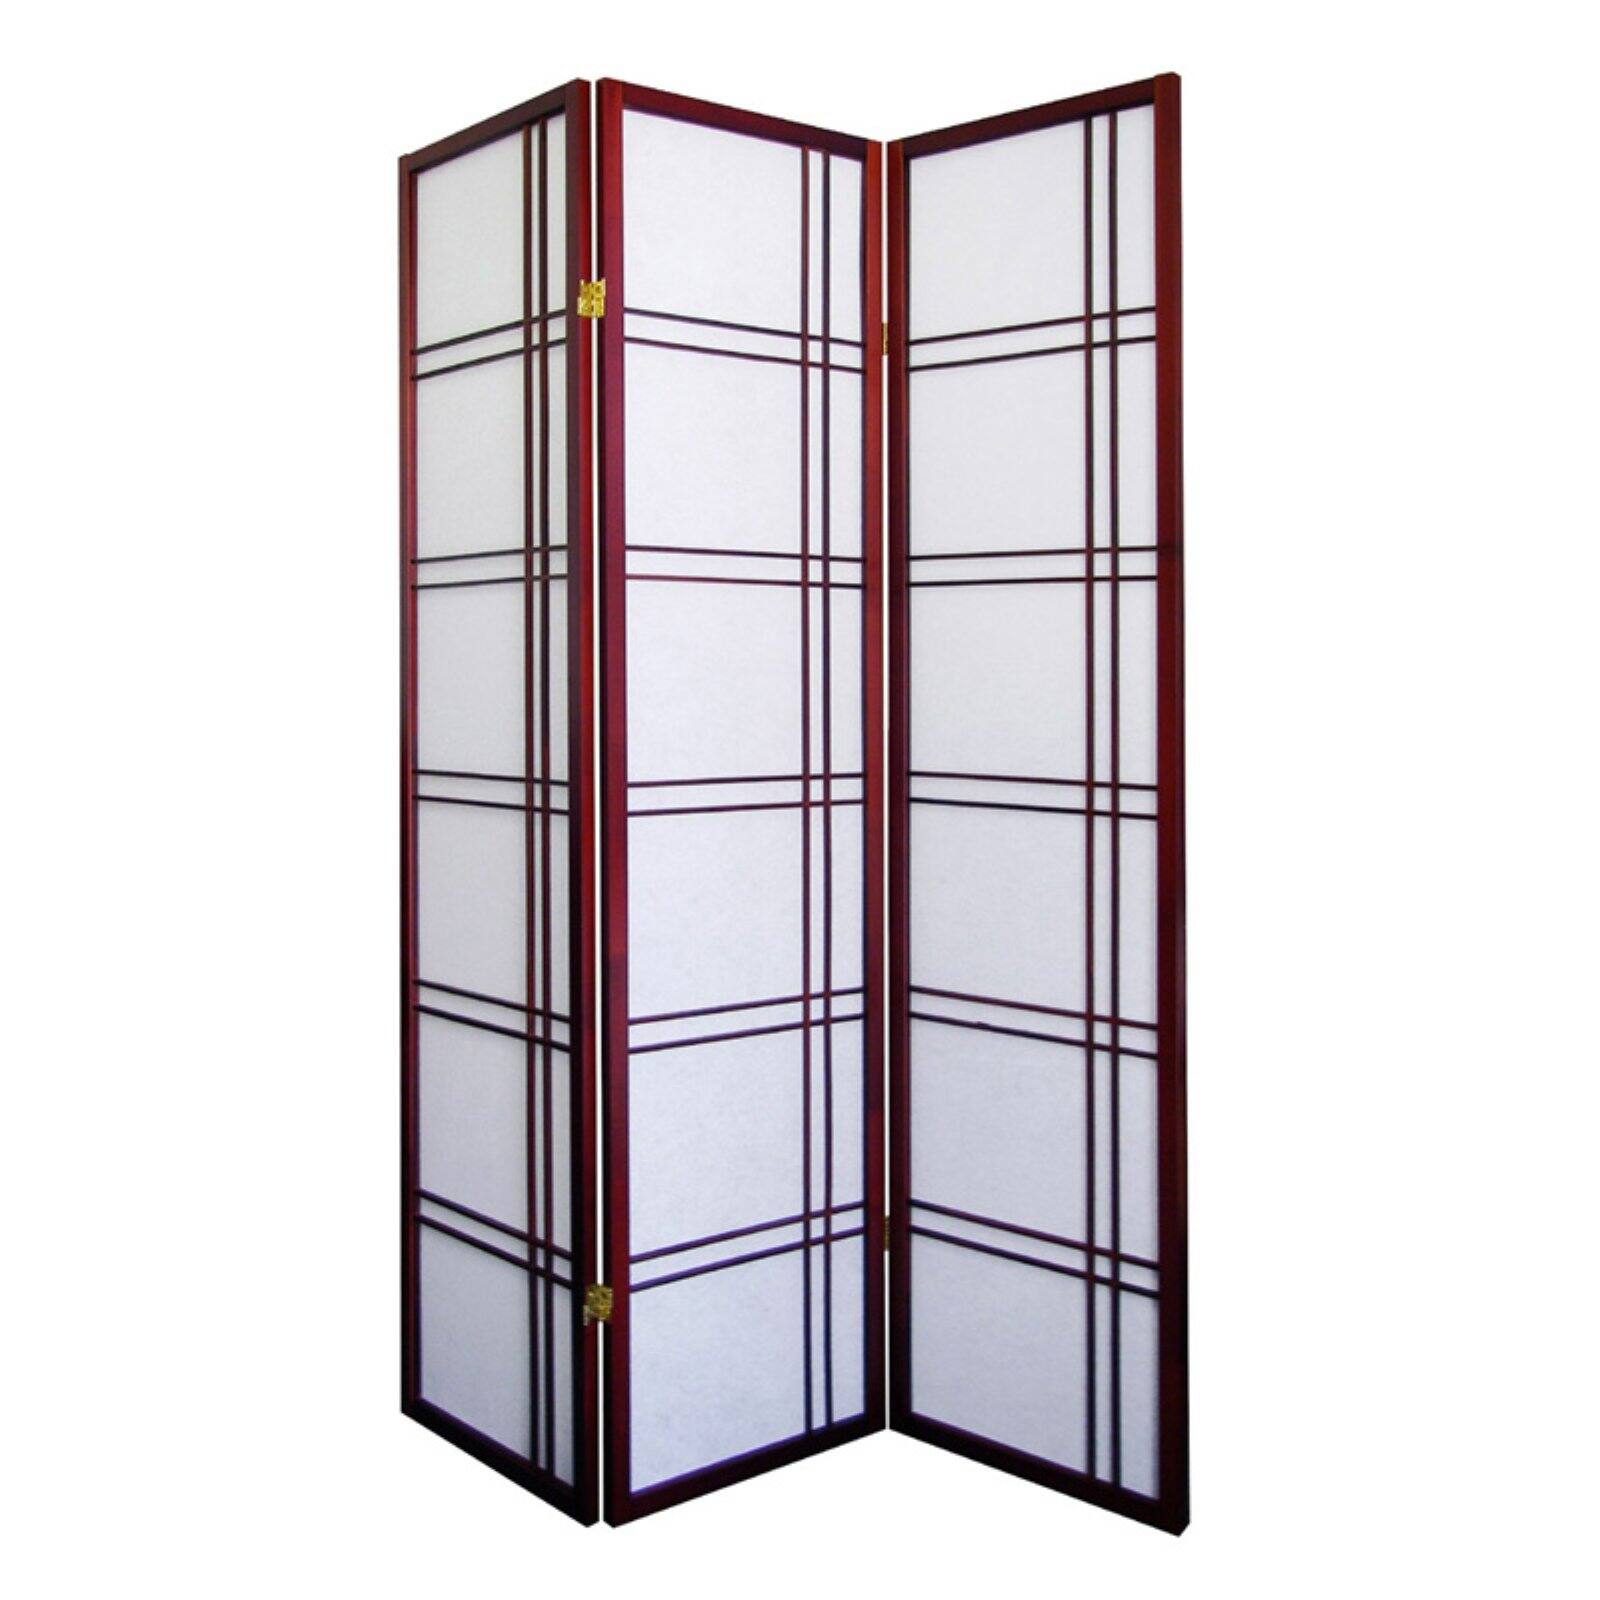 Ore Furniture  Girard 3-Panel Room Divider - Cherry - image 2 of 2